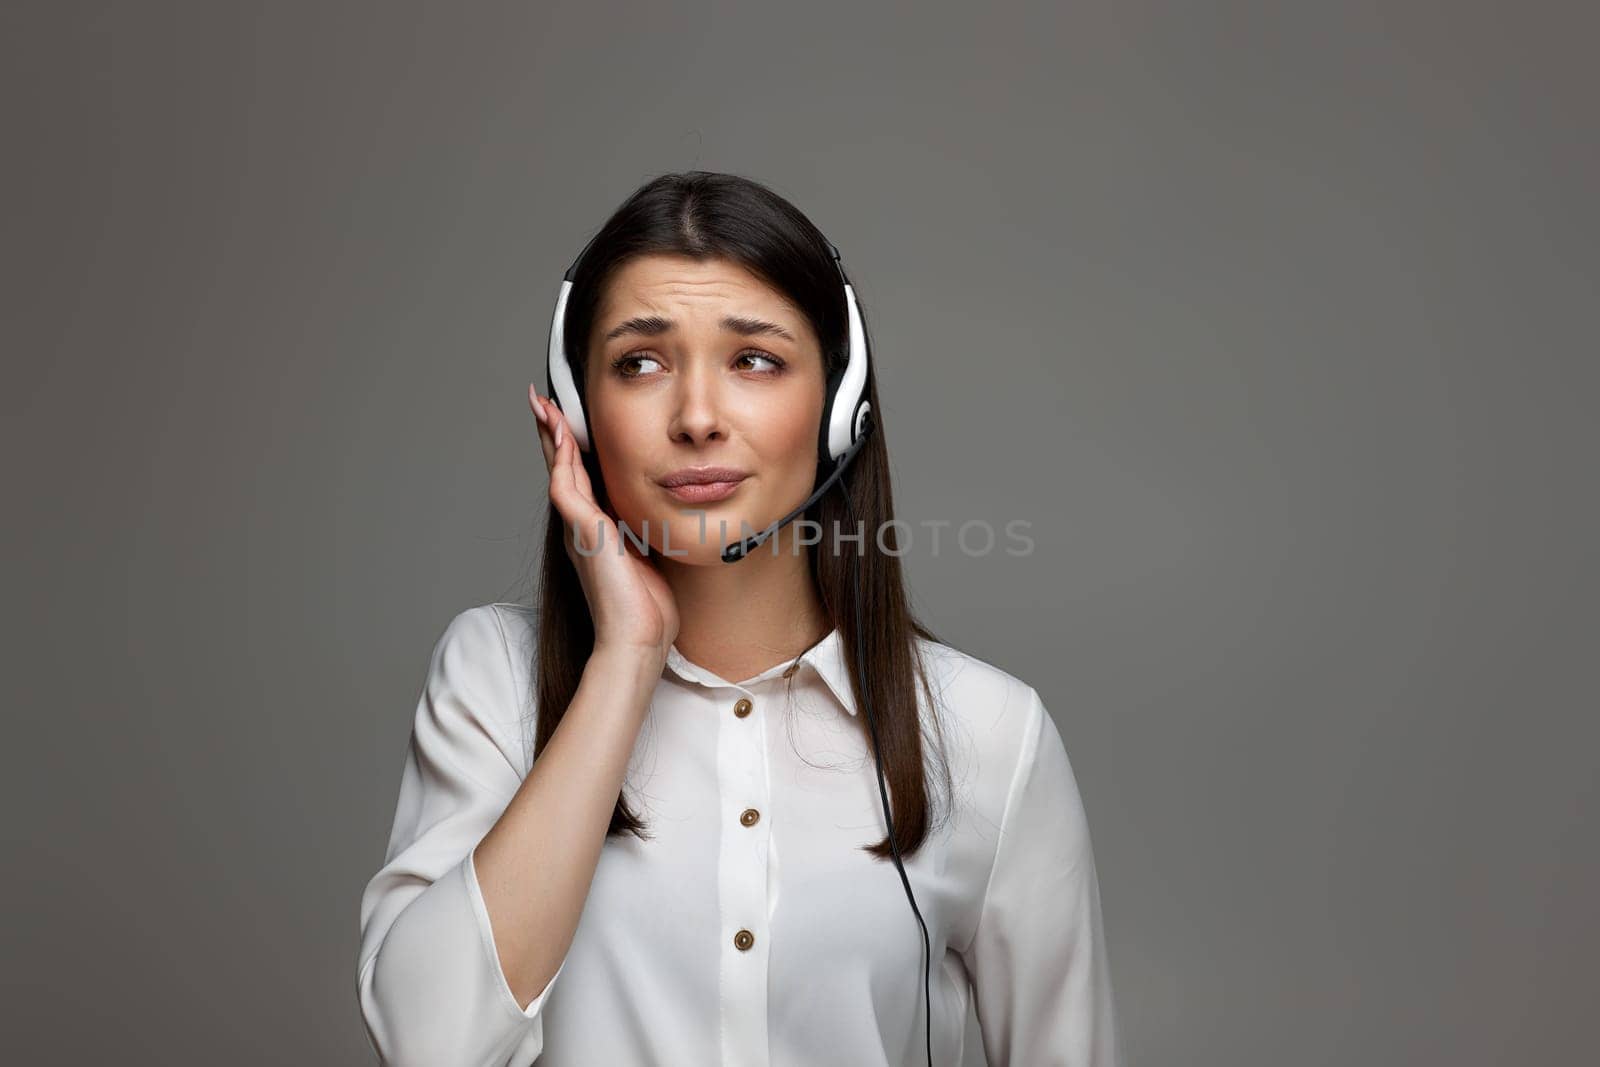 tired upset frustrated woman with headset is consulting clients online. Call center